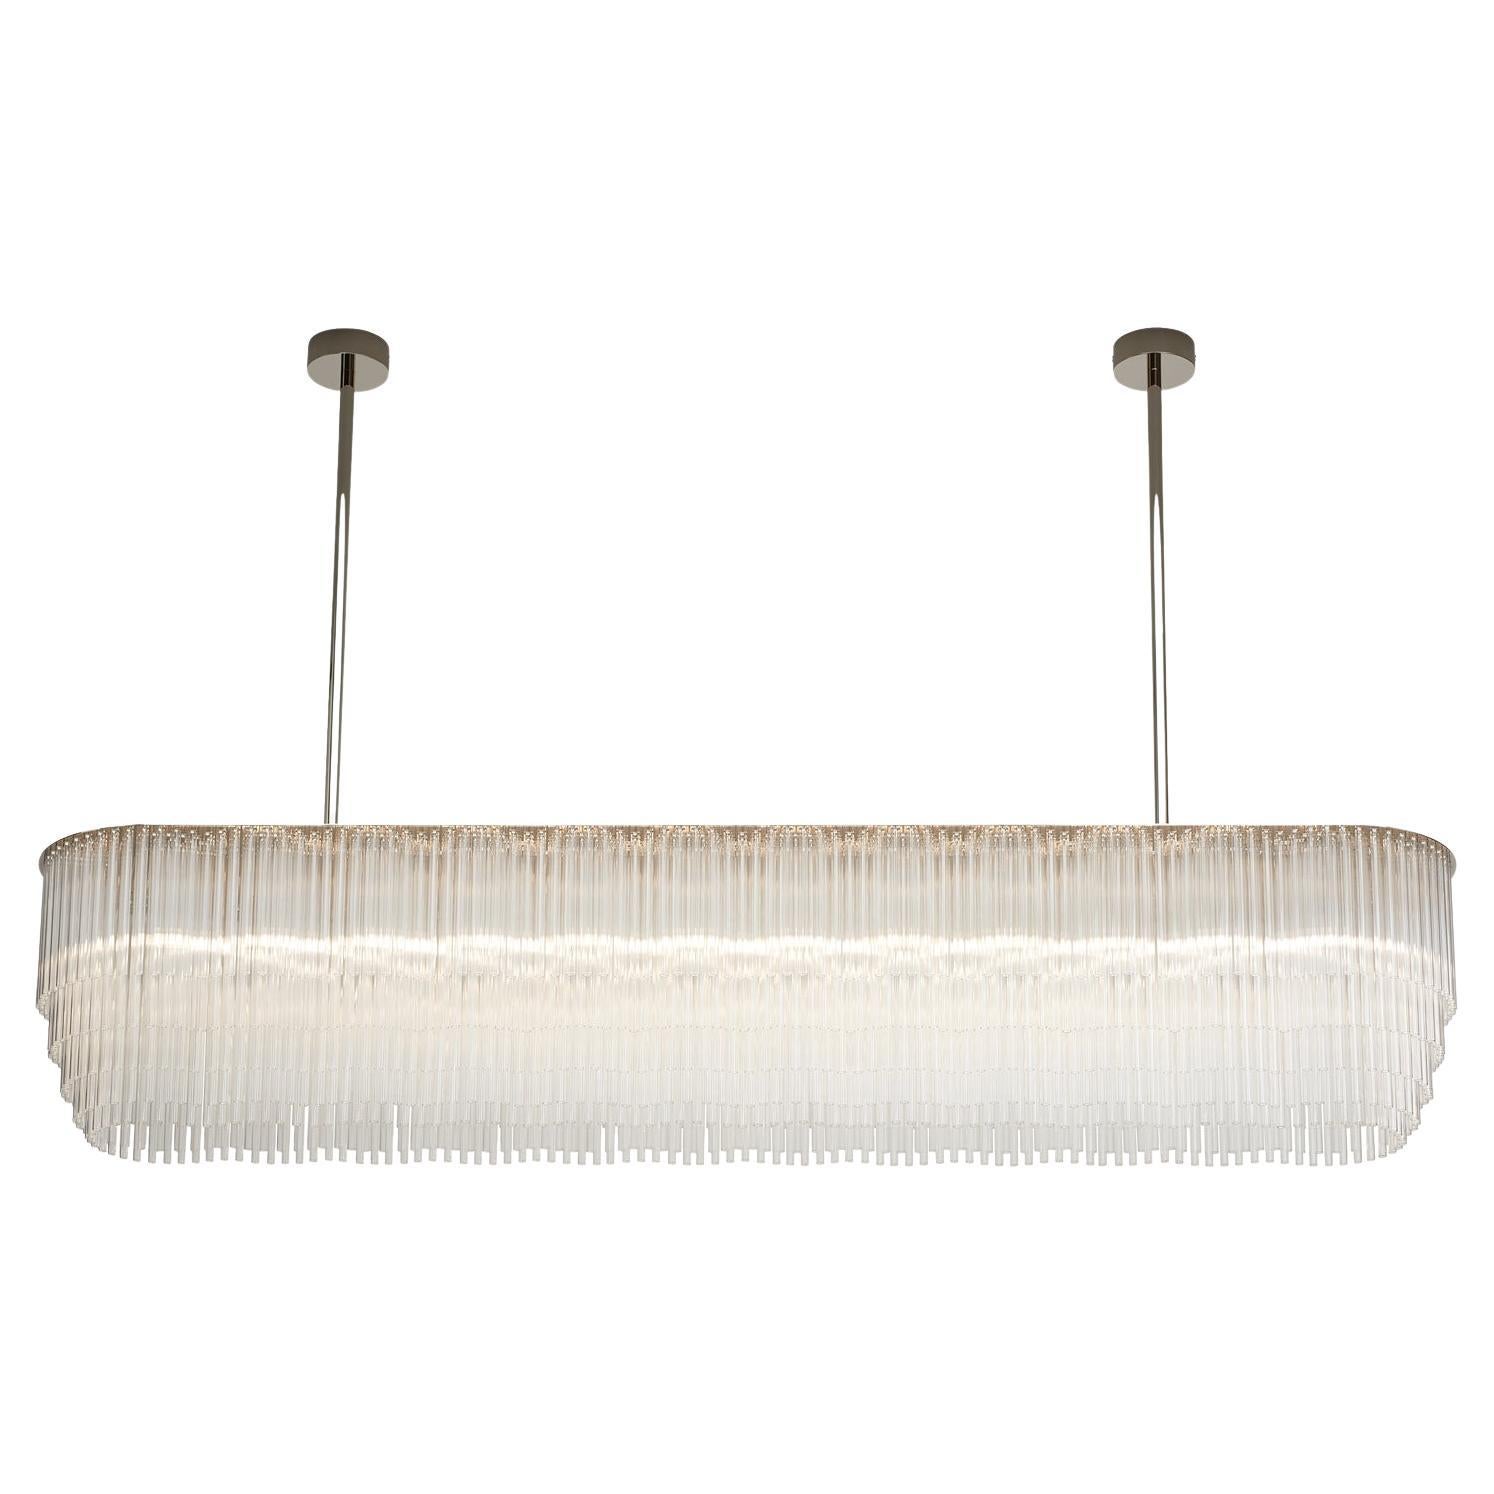 Linear Chandelier 1261mm / 25.75" in Polished Nickel with Tiered Glass Profile